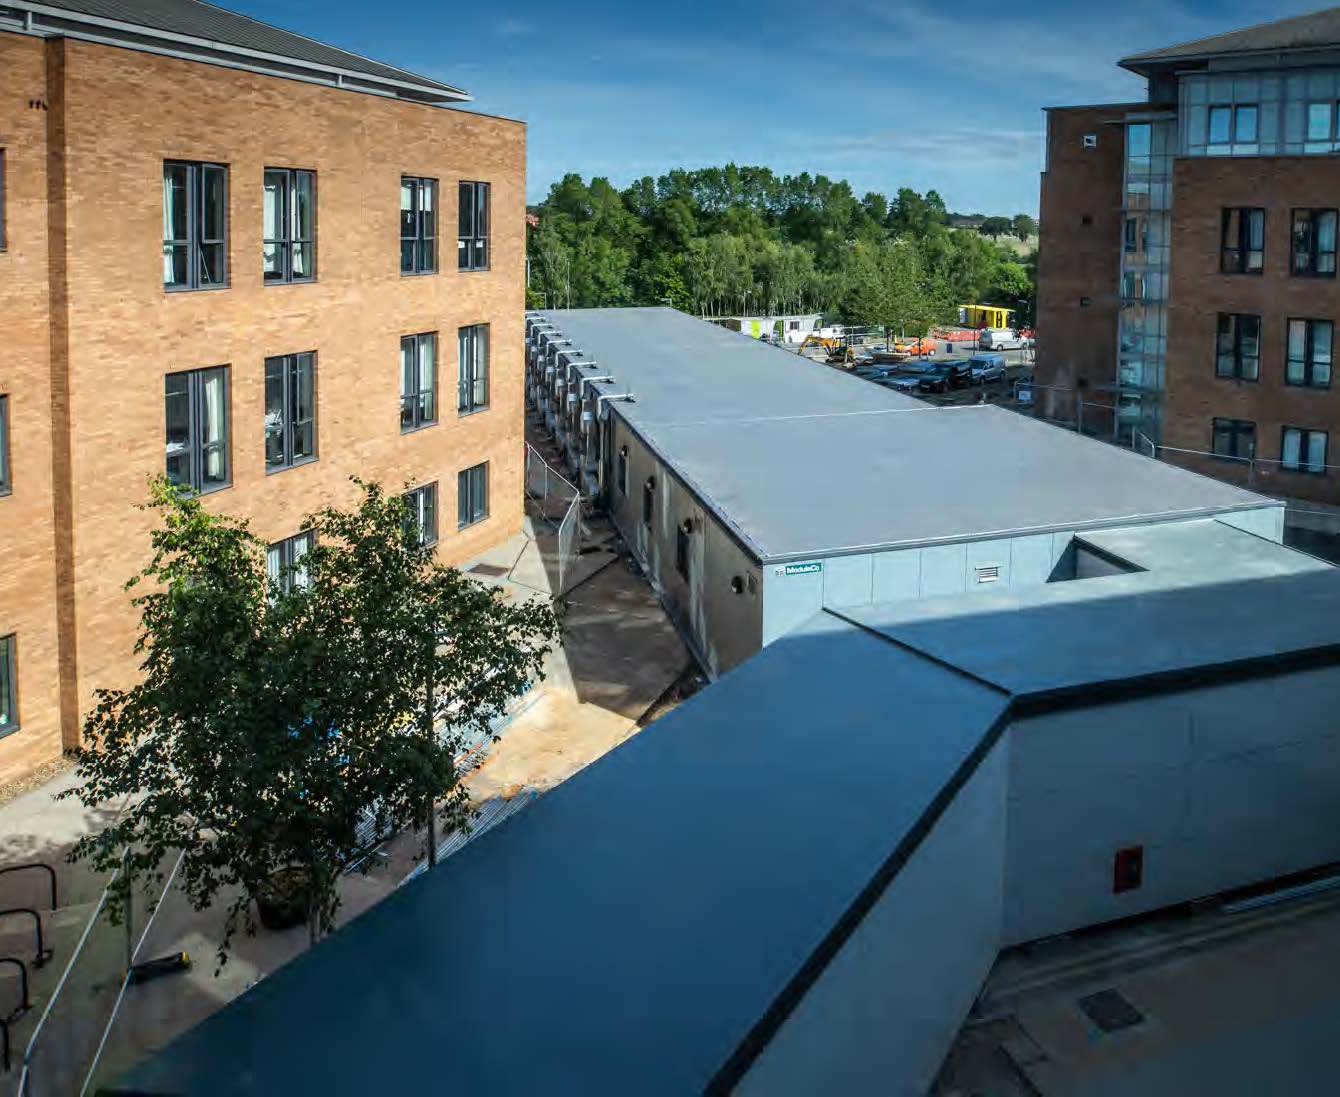 SIG roof for NHS isolation wards